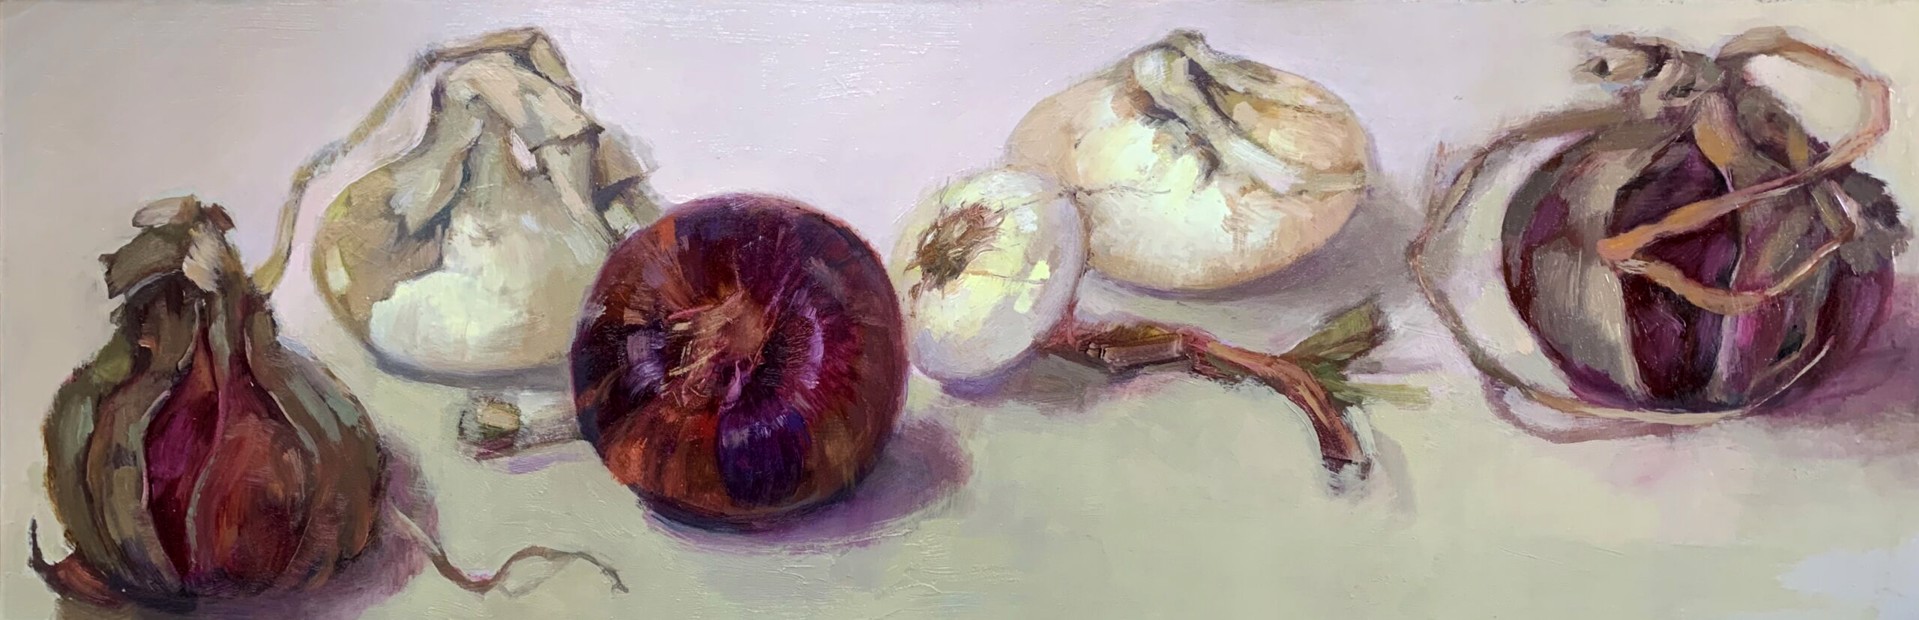 Gail Morrison "Parade of Onions" by Oil Painters of America